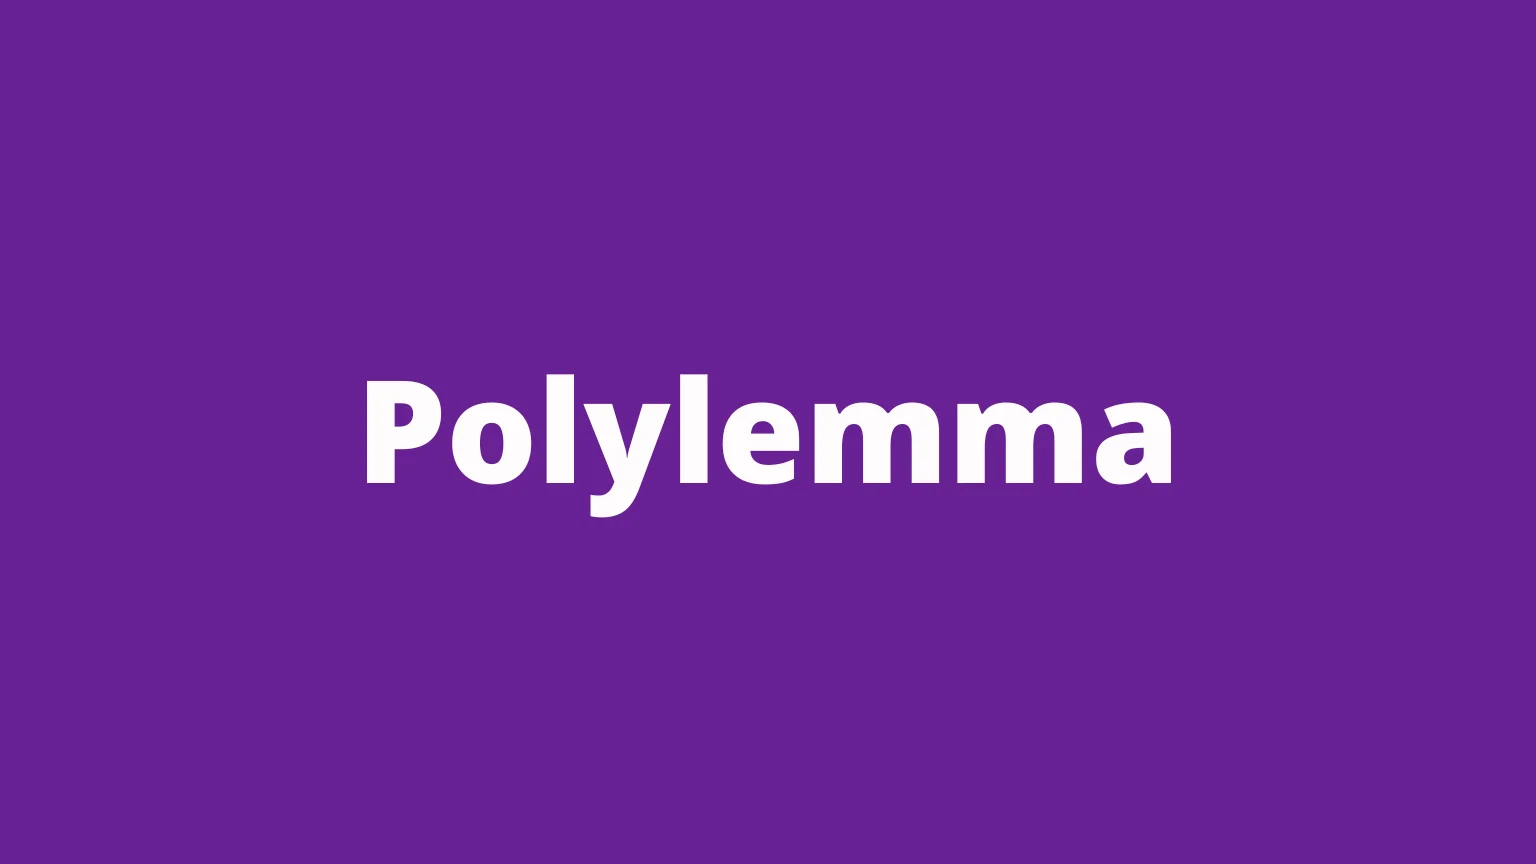 The word polylemma and its meaning